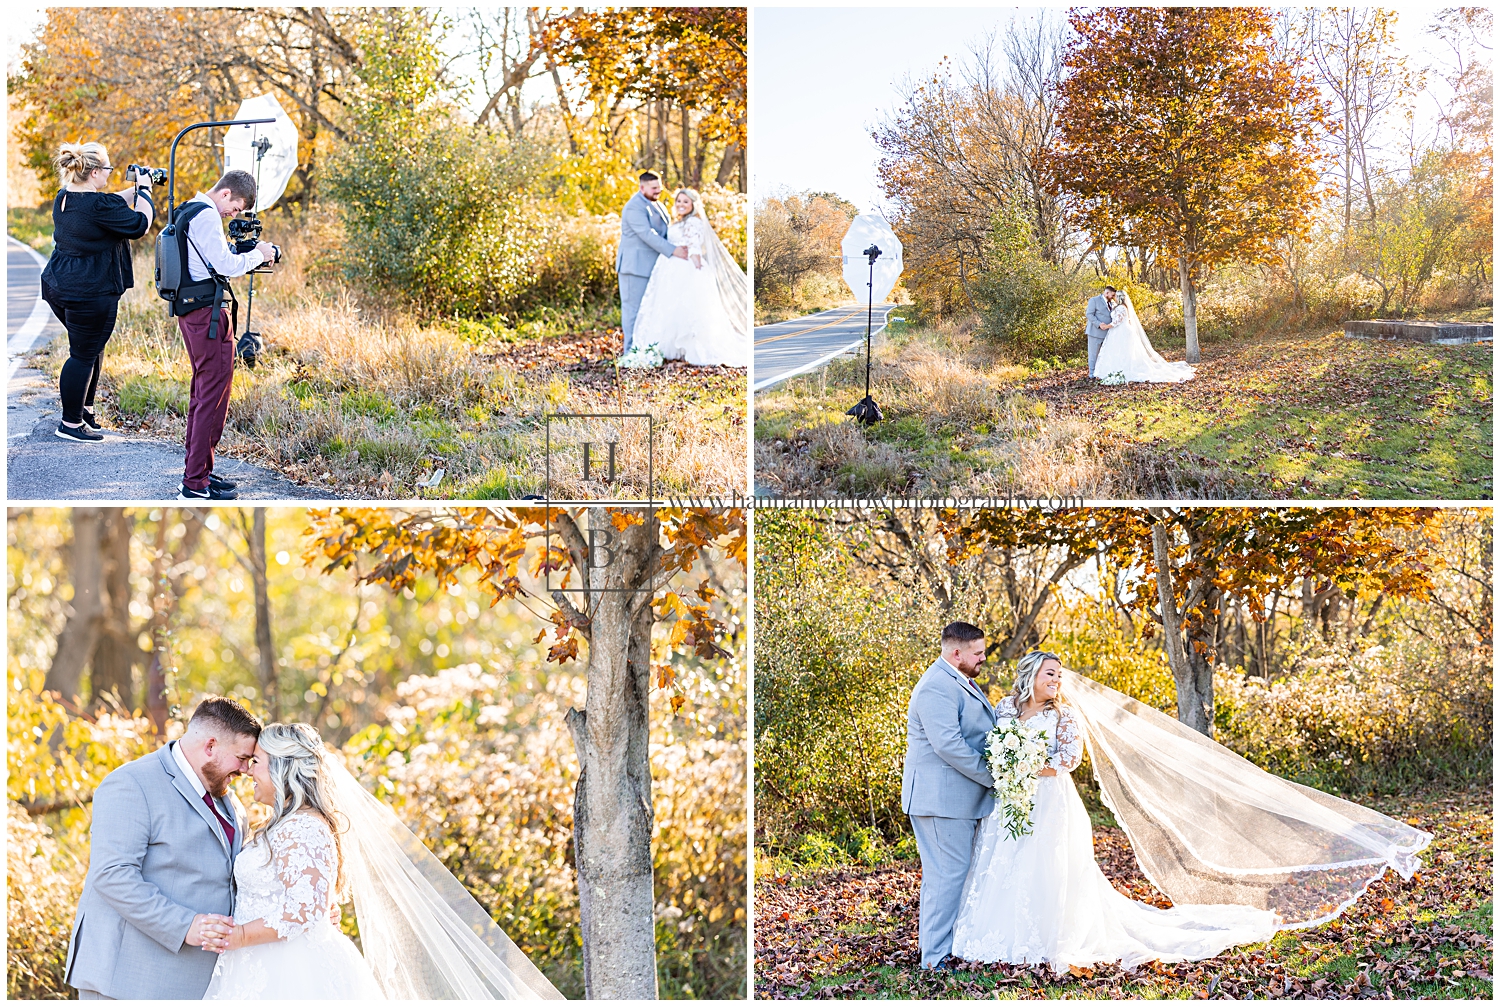 Wedding photographer takes fall wedding photos of couple by the side of a road